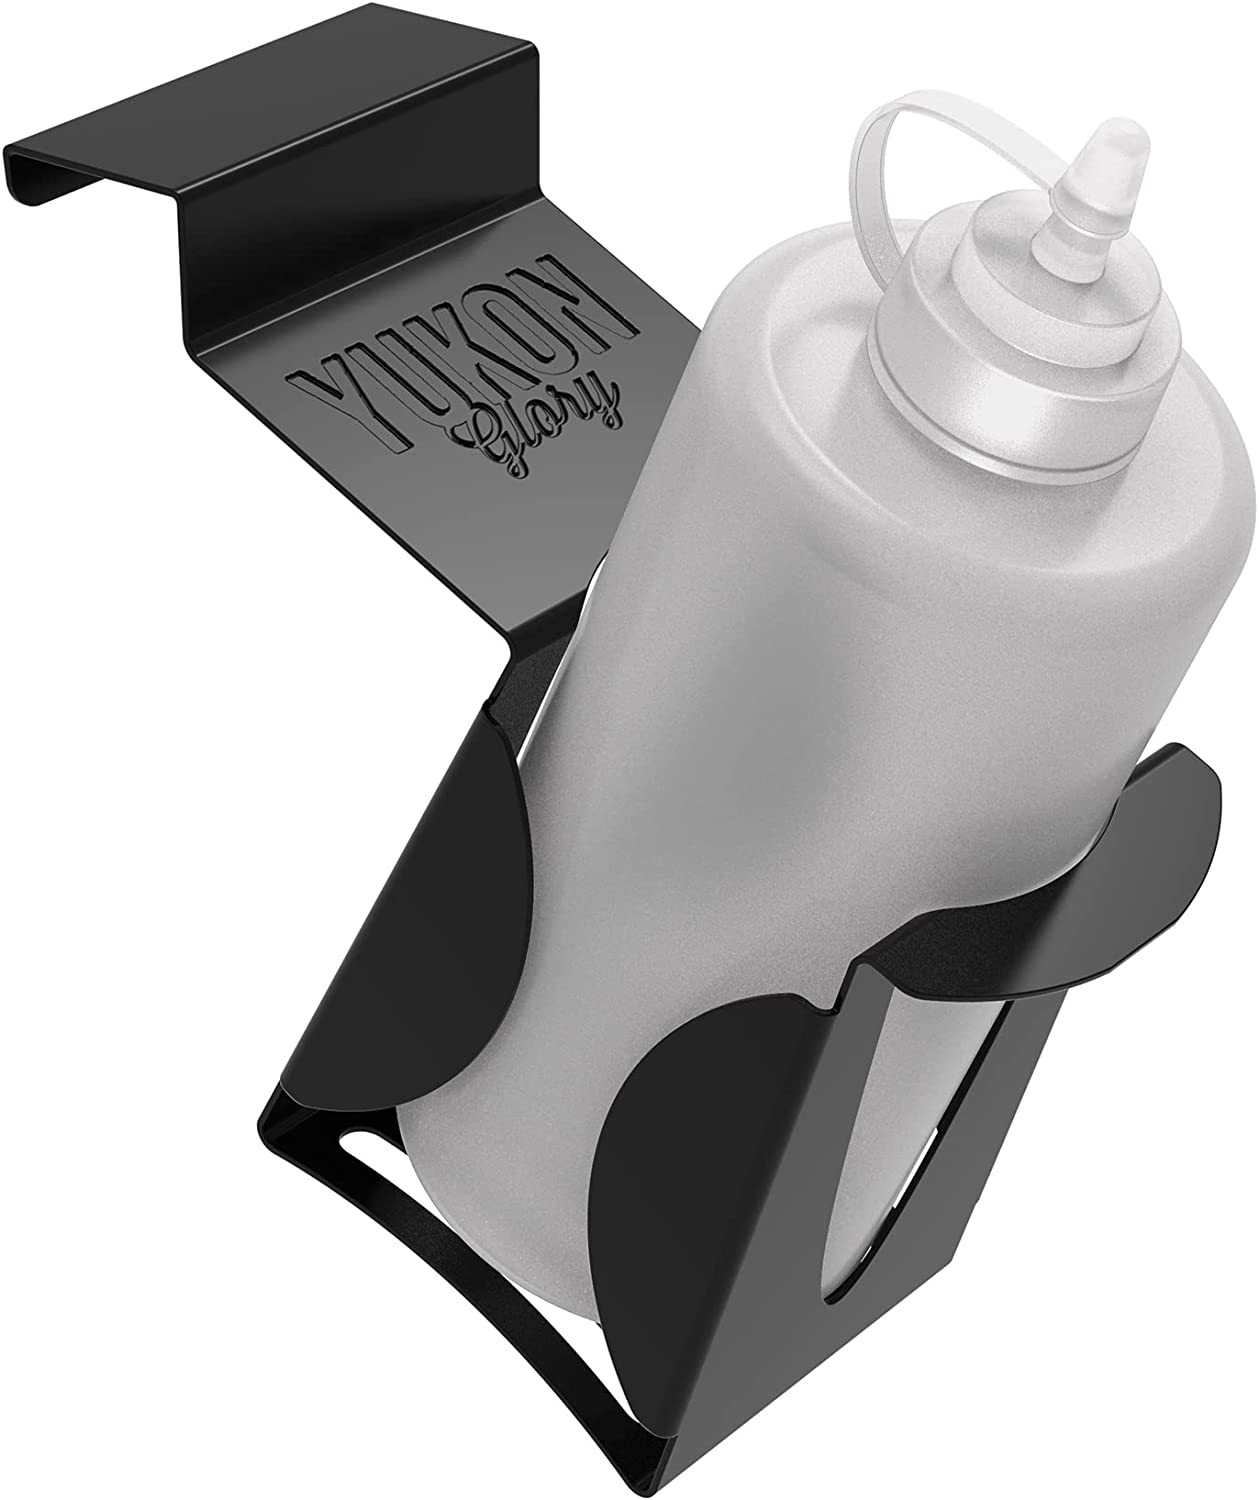 Yukon Glory Squeeze Bottle Holder - Designed to fit Blackstone Griddle Models 1517 and 1825 - Set of 2 Black Stainless Steel Holders for Griddle Squeeze Bottles (Not For Table-Top or Pro-series)